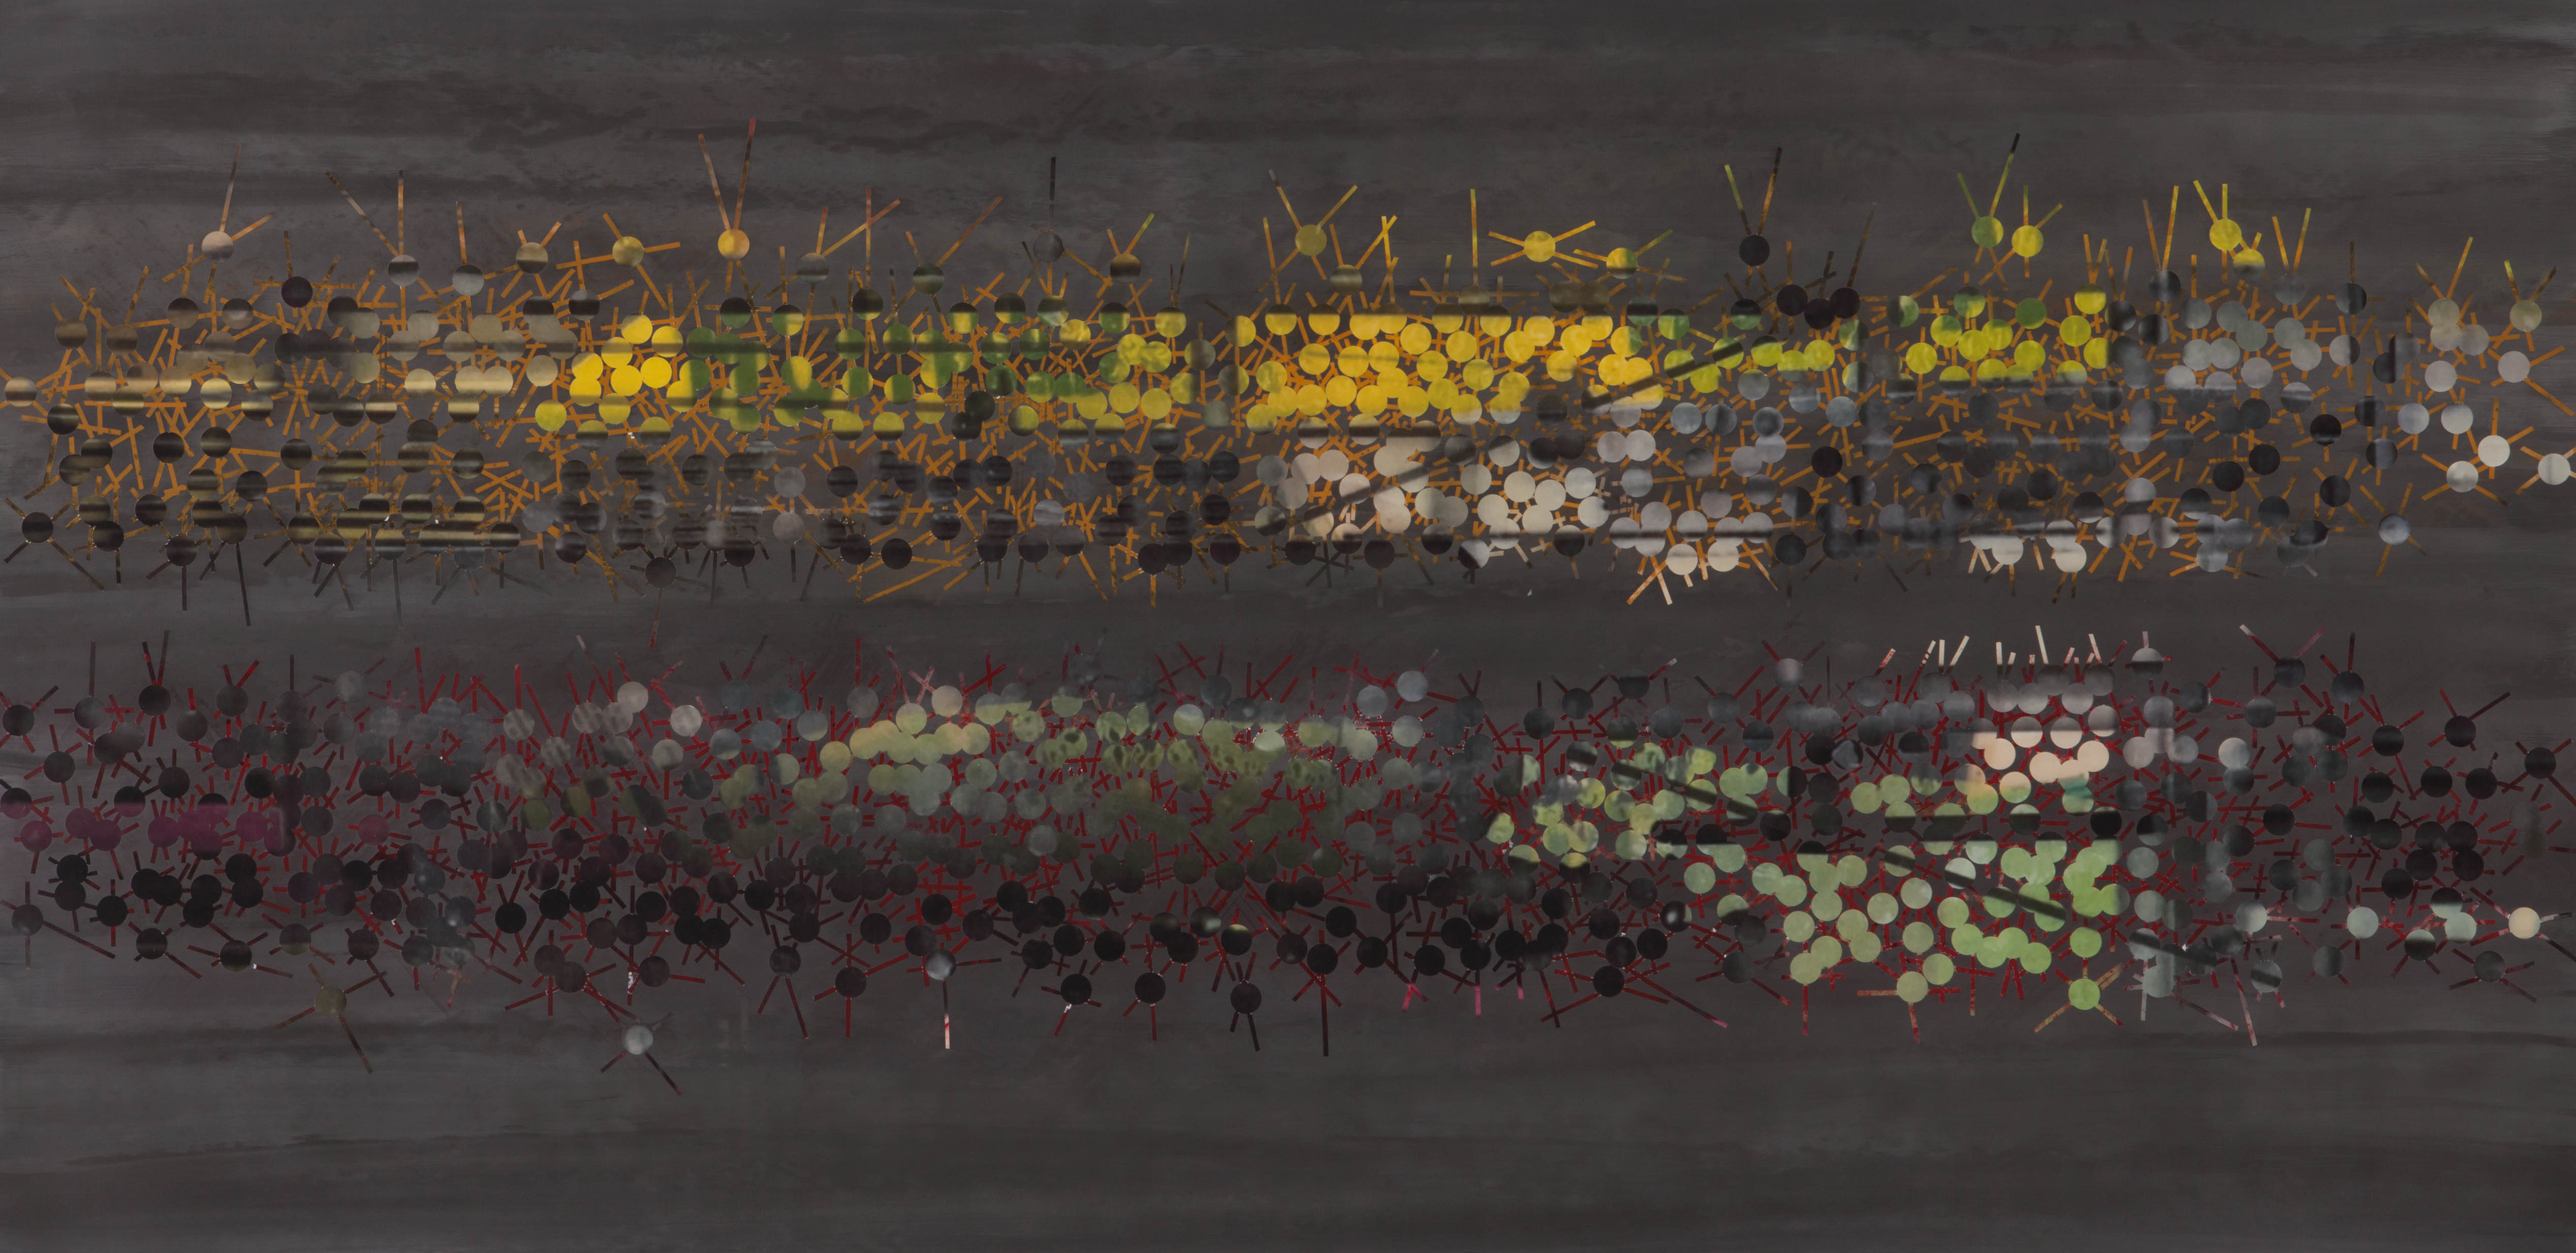 TRIBE 178 - 2013, acrylic, watercolor, graphite on paper, 35.5 x 72 inches (AVAILABLE)